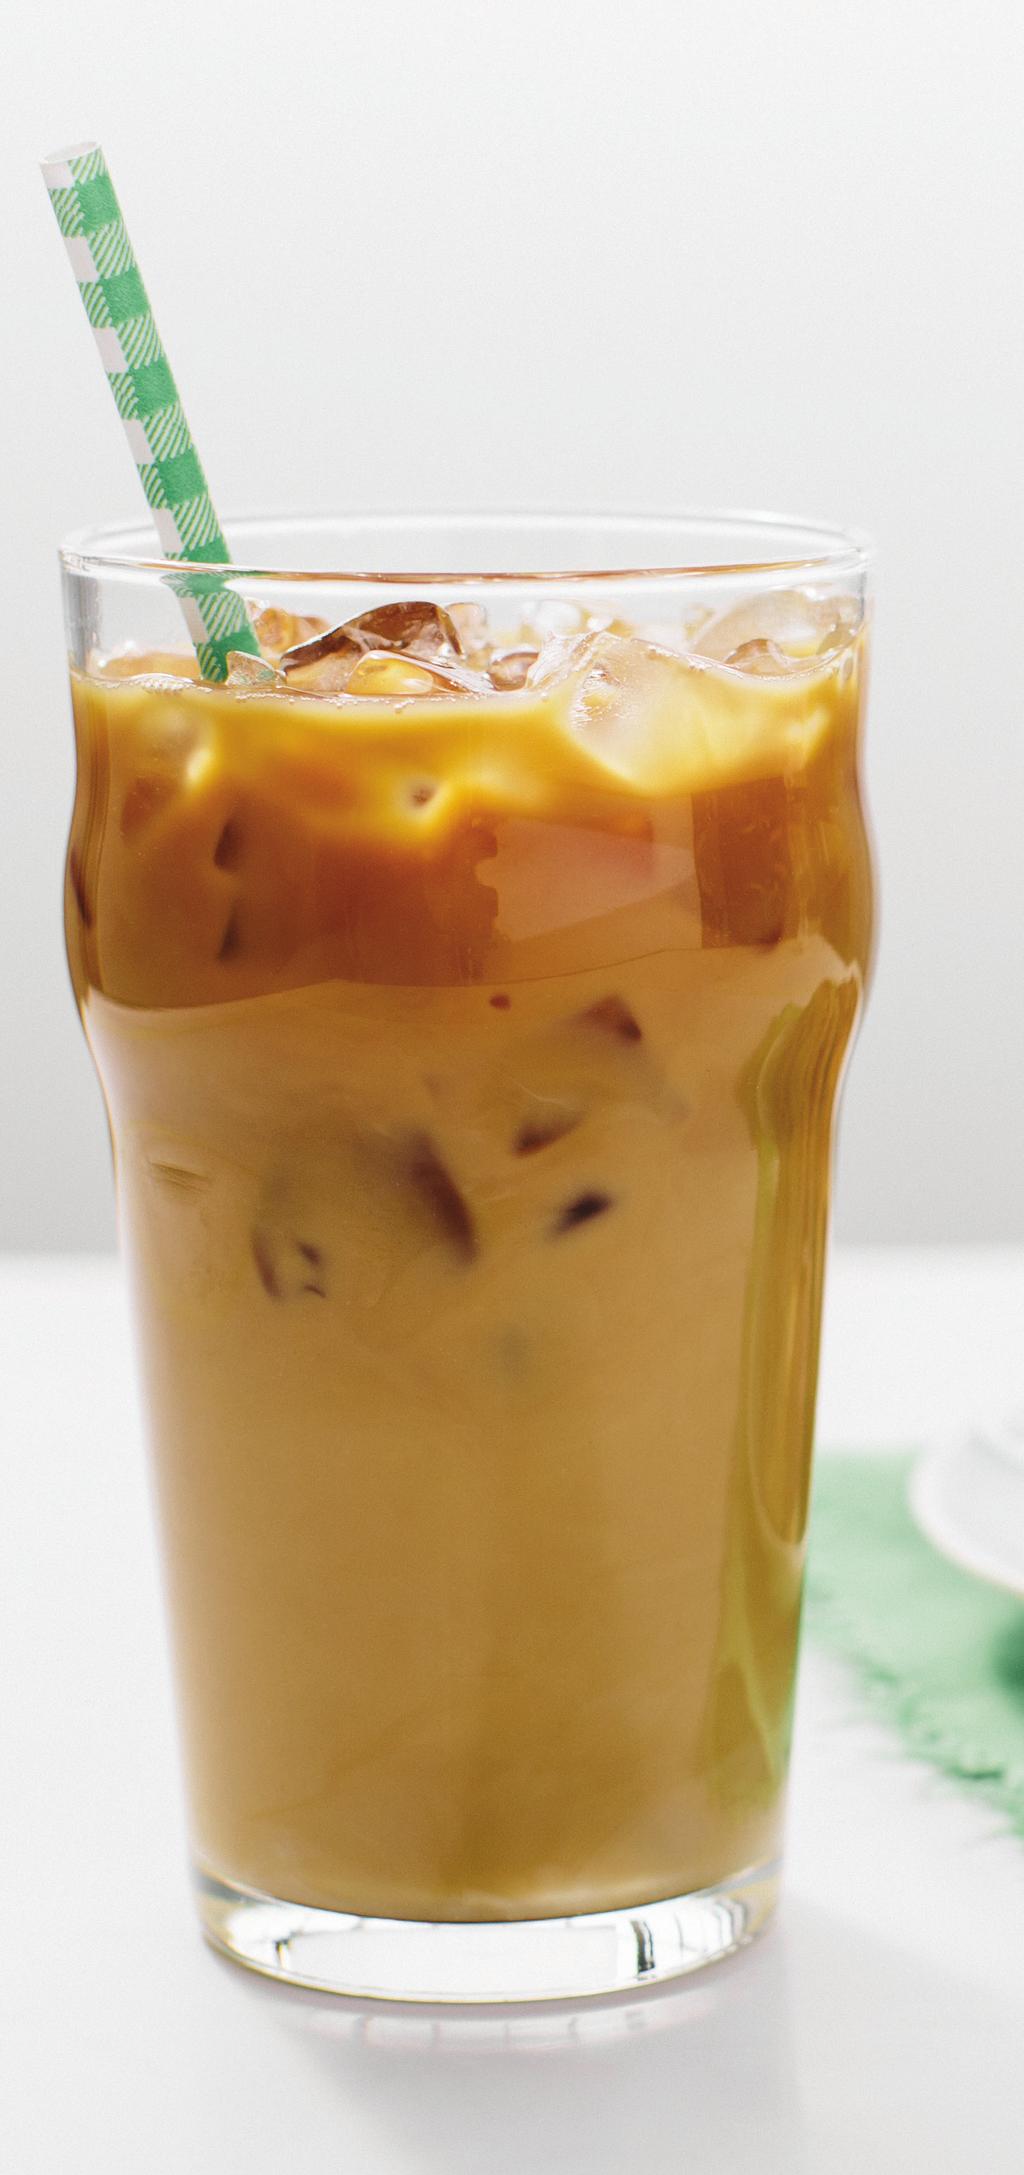 French Vanilla Iced Coffee Hazelnut Iced Coffee 2 cups ice 2 tablespoons French vanilla syrup 4 cup half & half 2 cups ice 3 tablespoons hazelnut syrup 2 cup half & half.